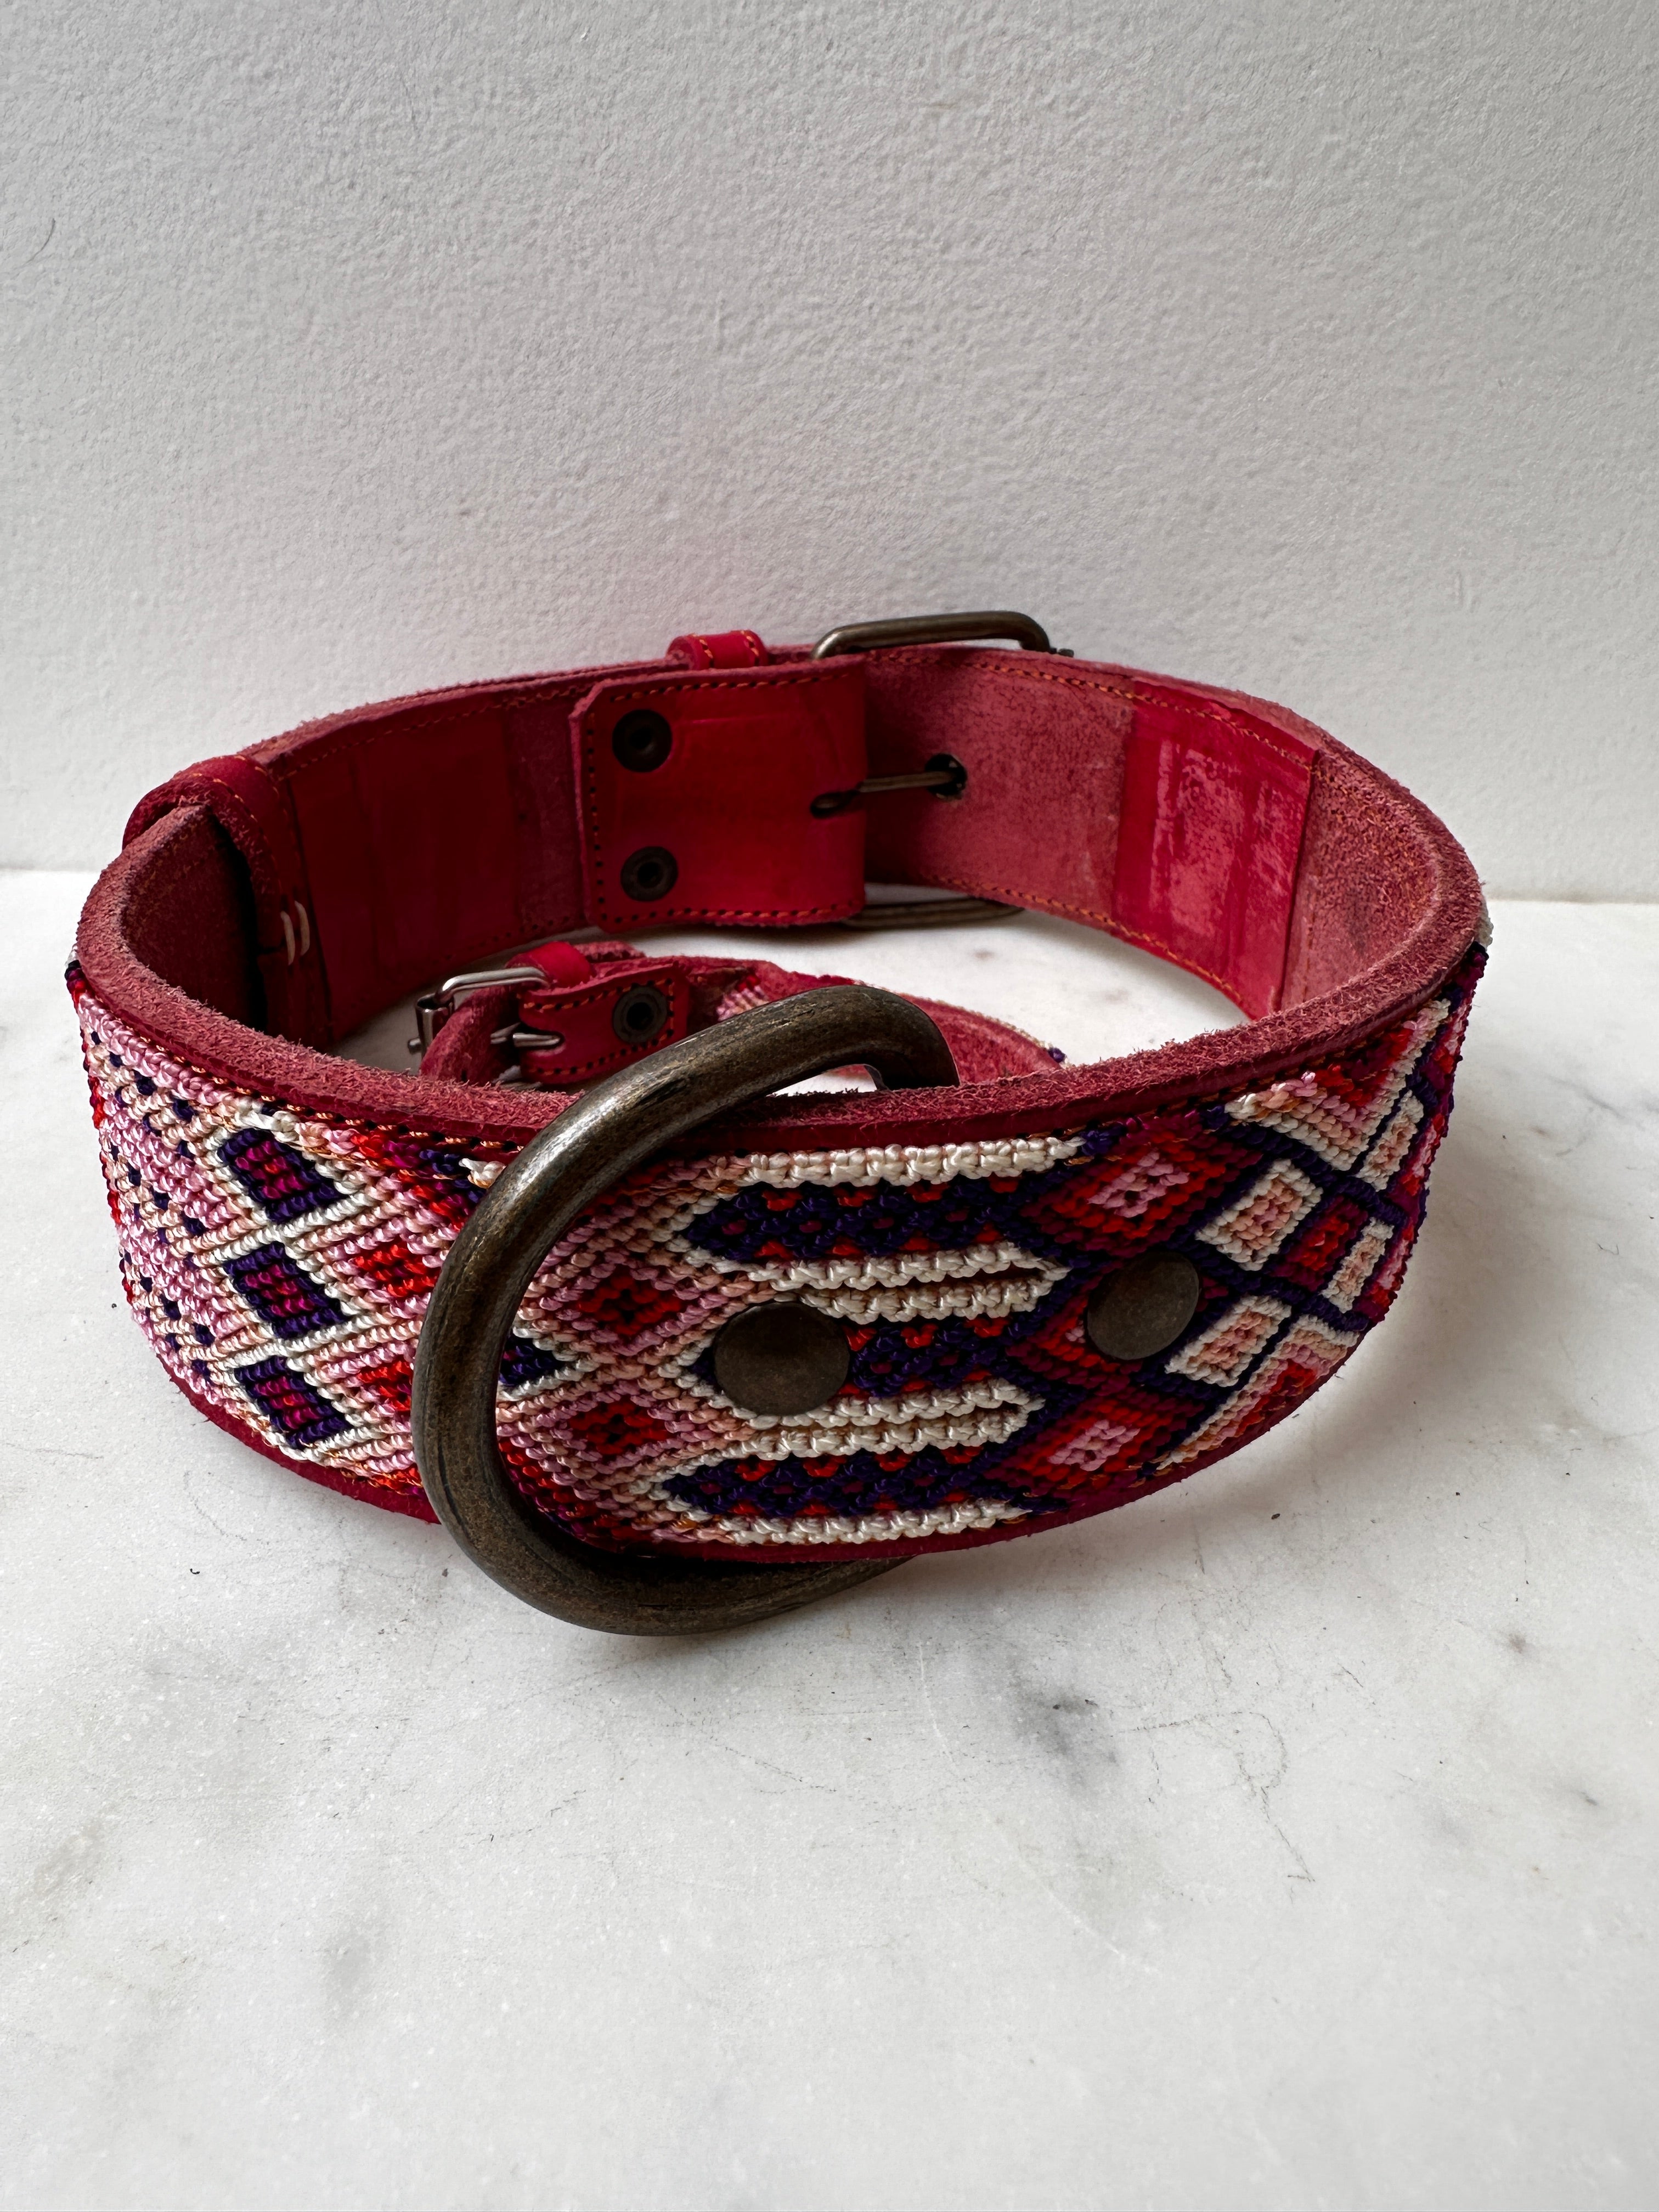 Future Nomads Homewares One Size Huichol Leather Wide Dog Collar L2